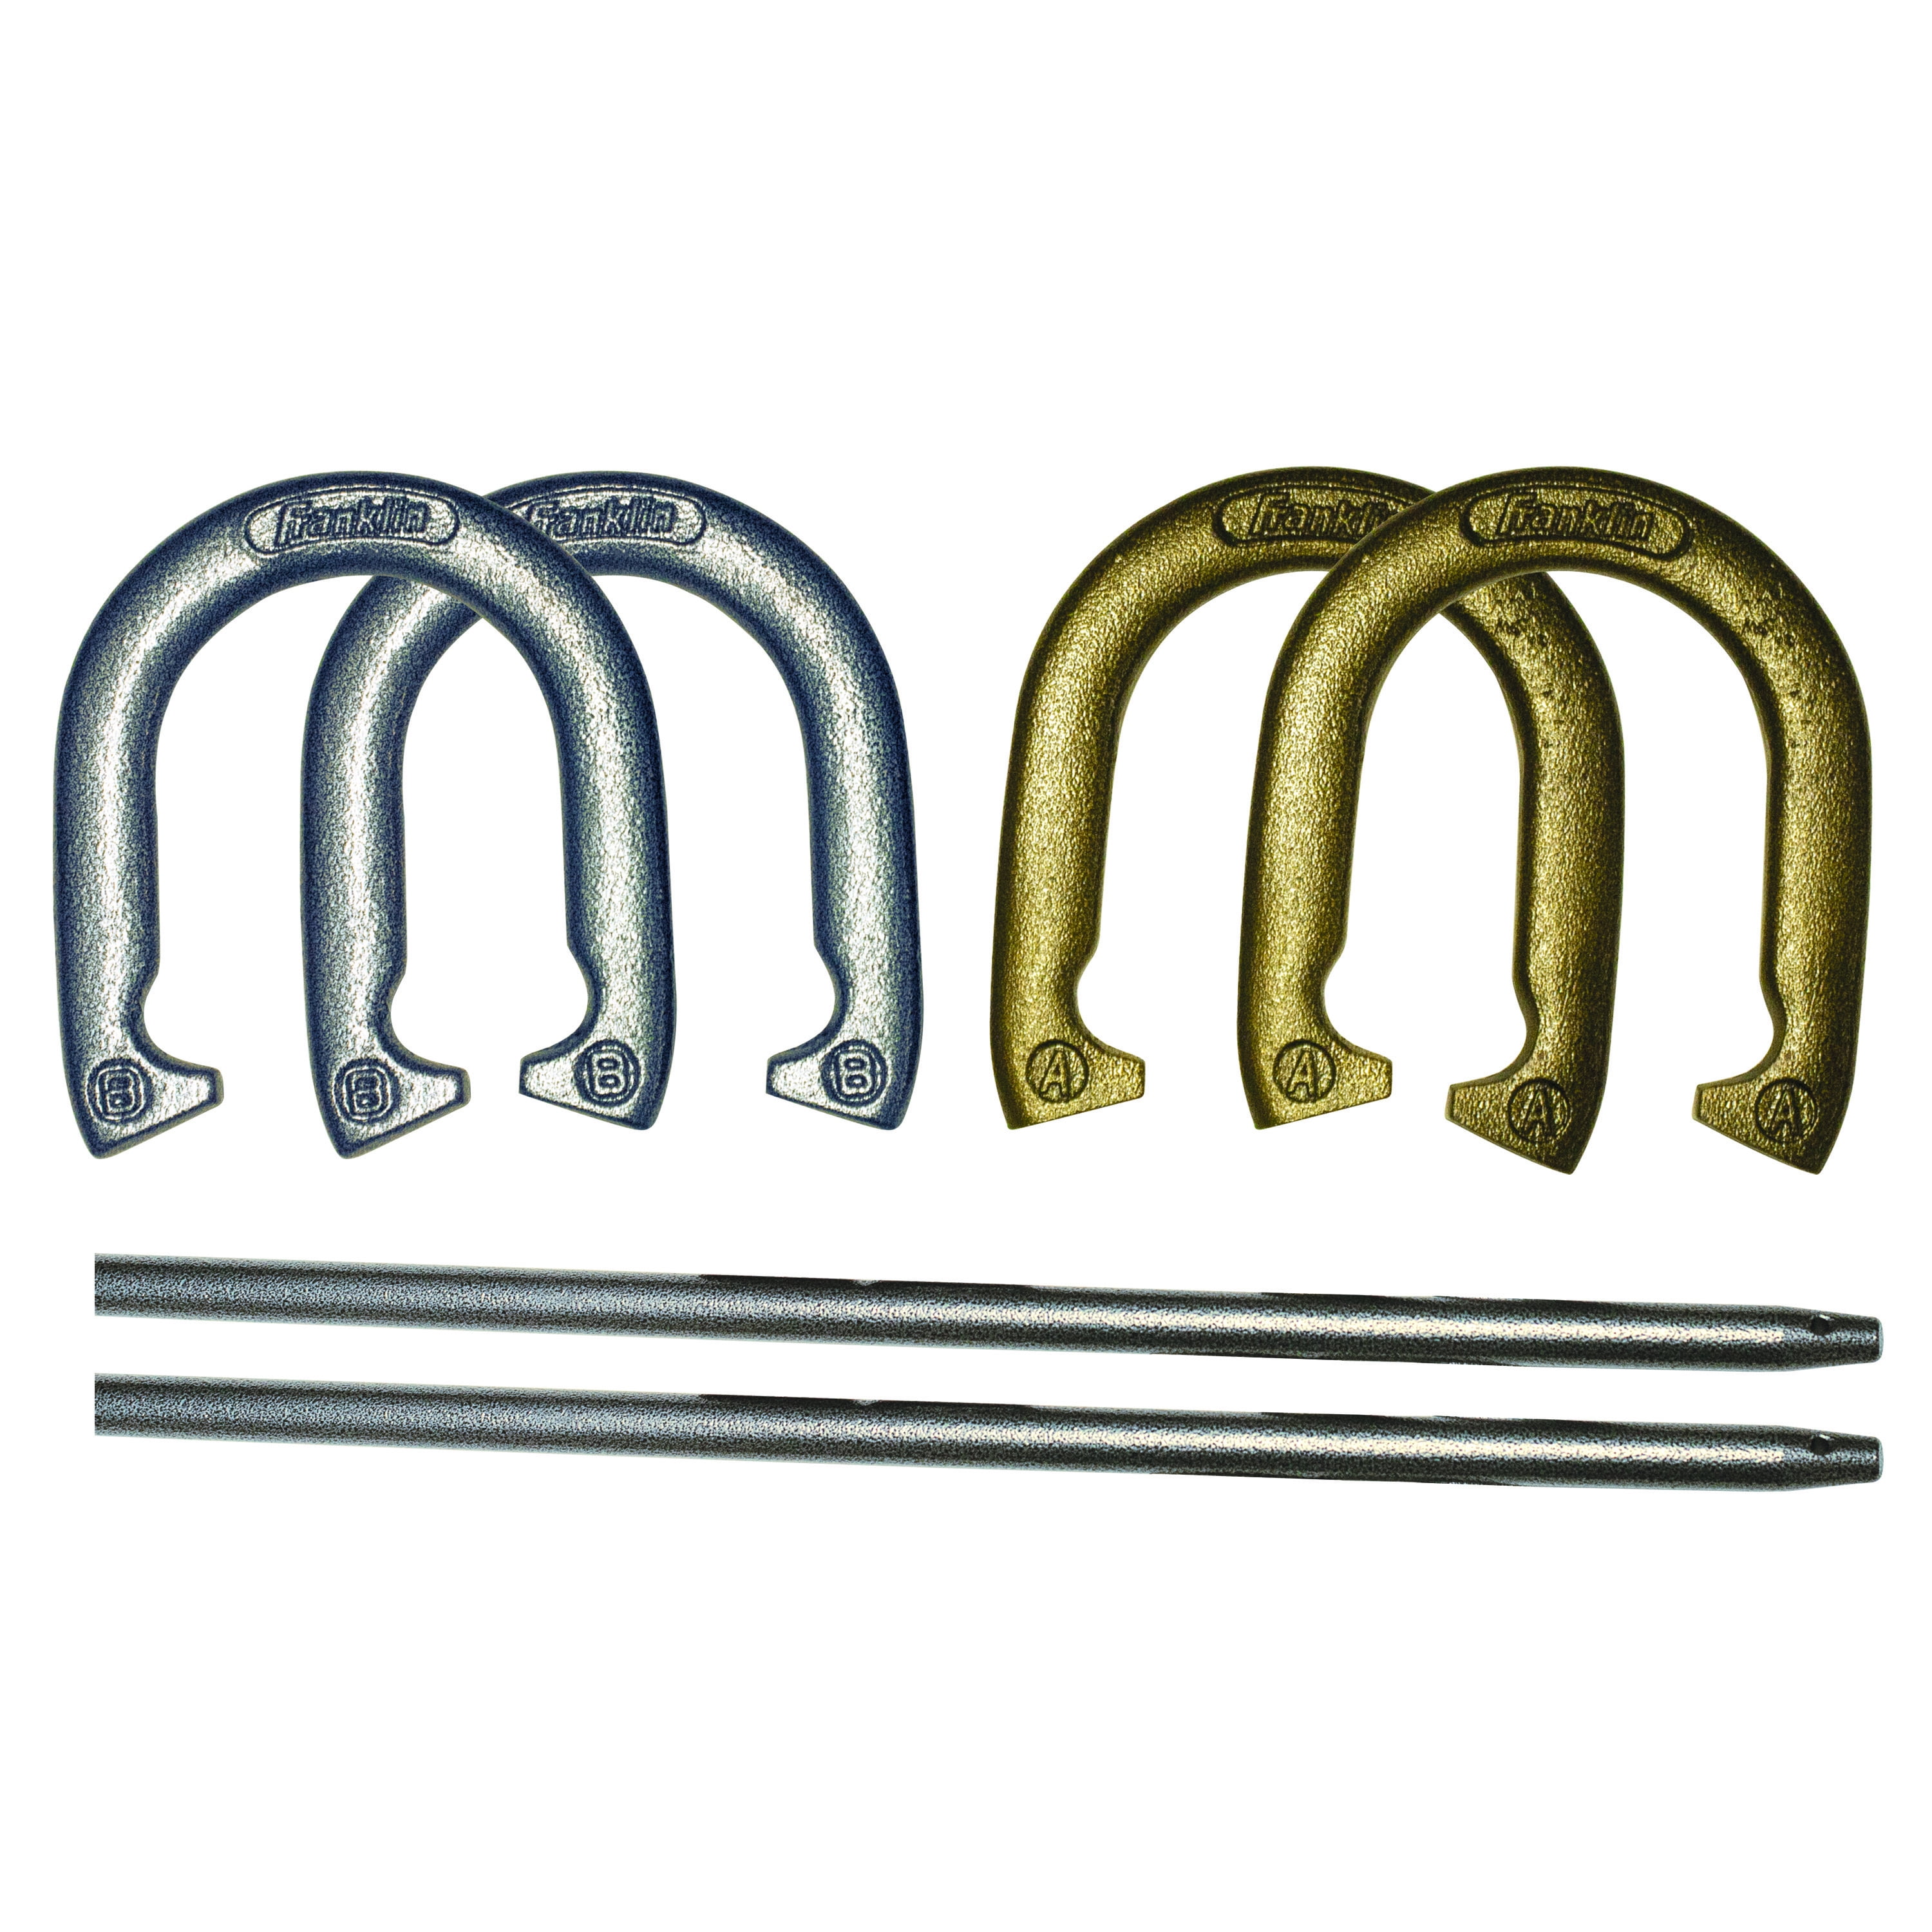 Franklin Sports Horseshoes Set - Metal Horseshoe Game Set for Adults + Kids  - Official Weight Steel Horseshoes - Beach + Lawn Horseshoes - American  Series